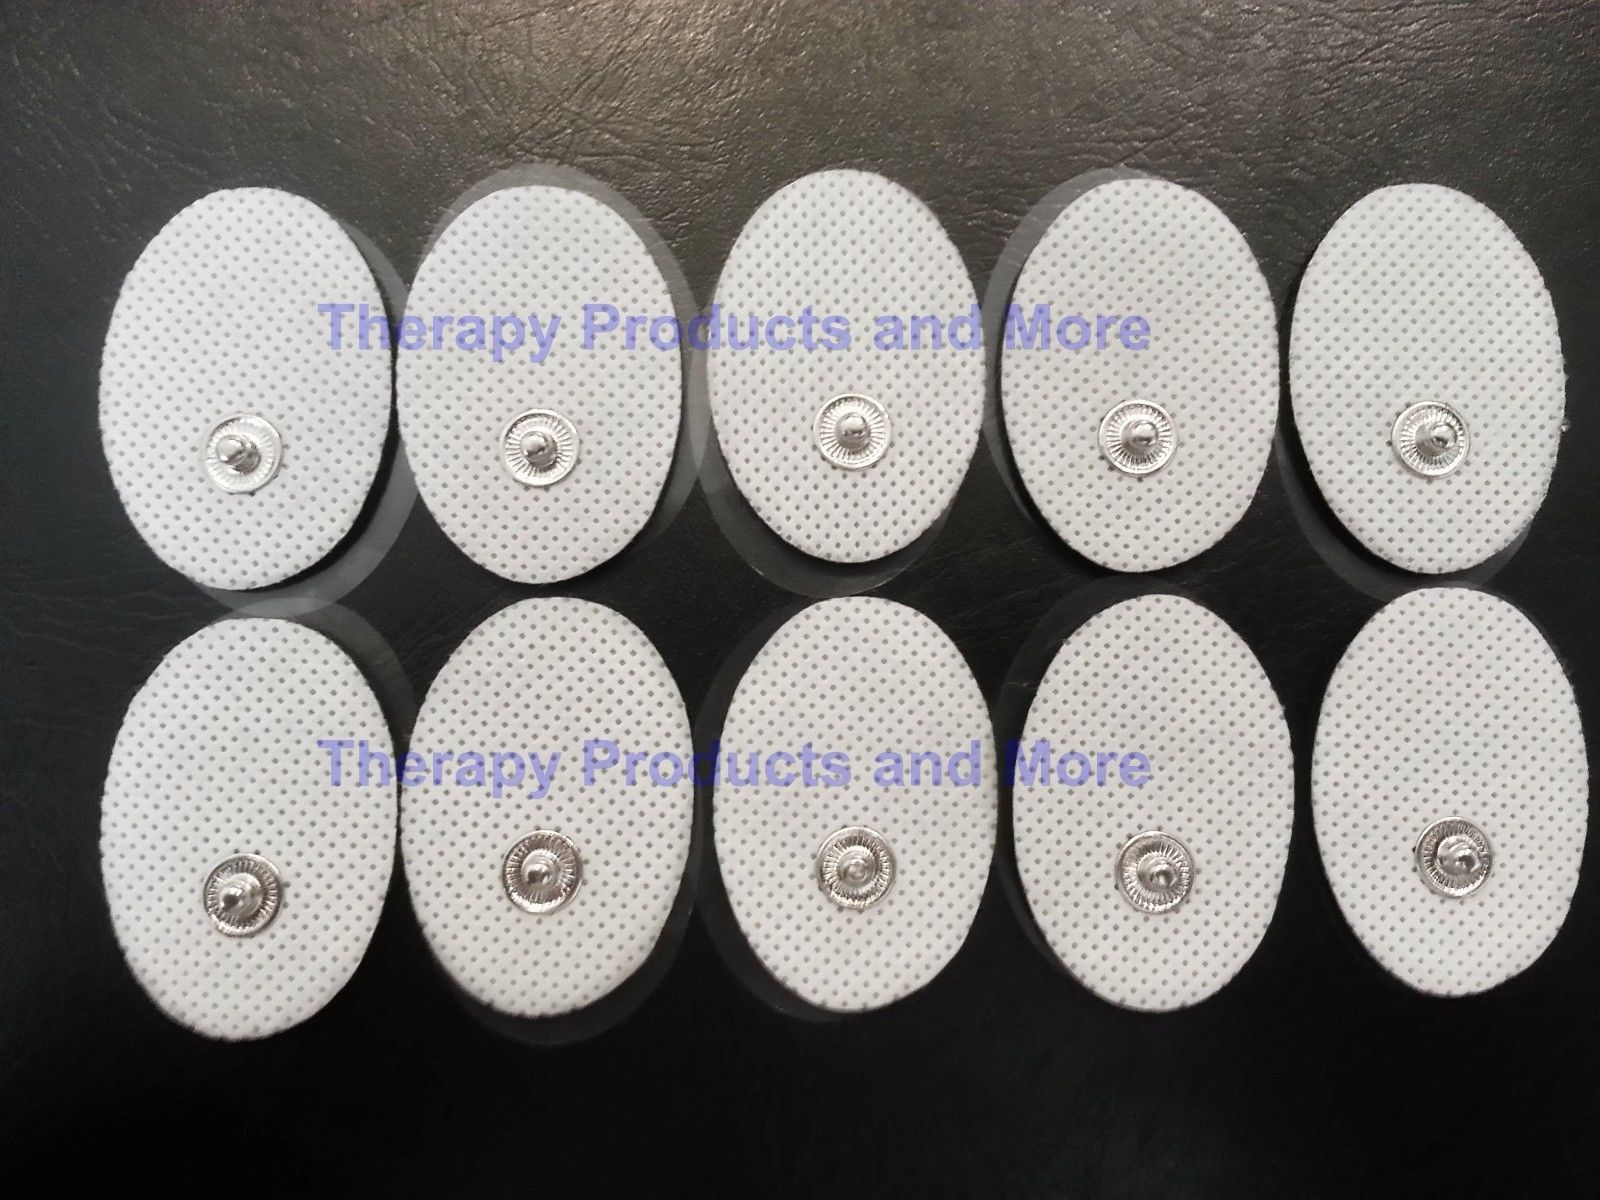 Small OVAL Replacement Pads (10) for IQ Digital Massage Massager - Washable - $11.38